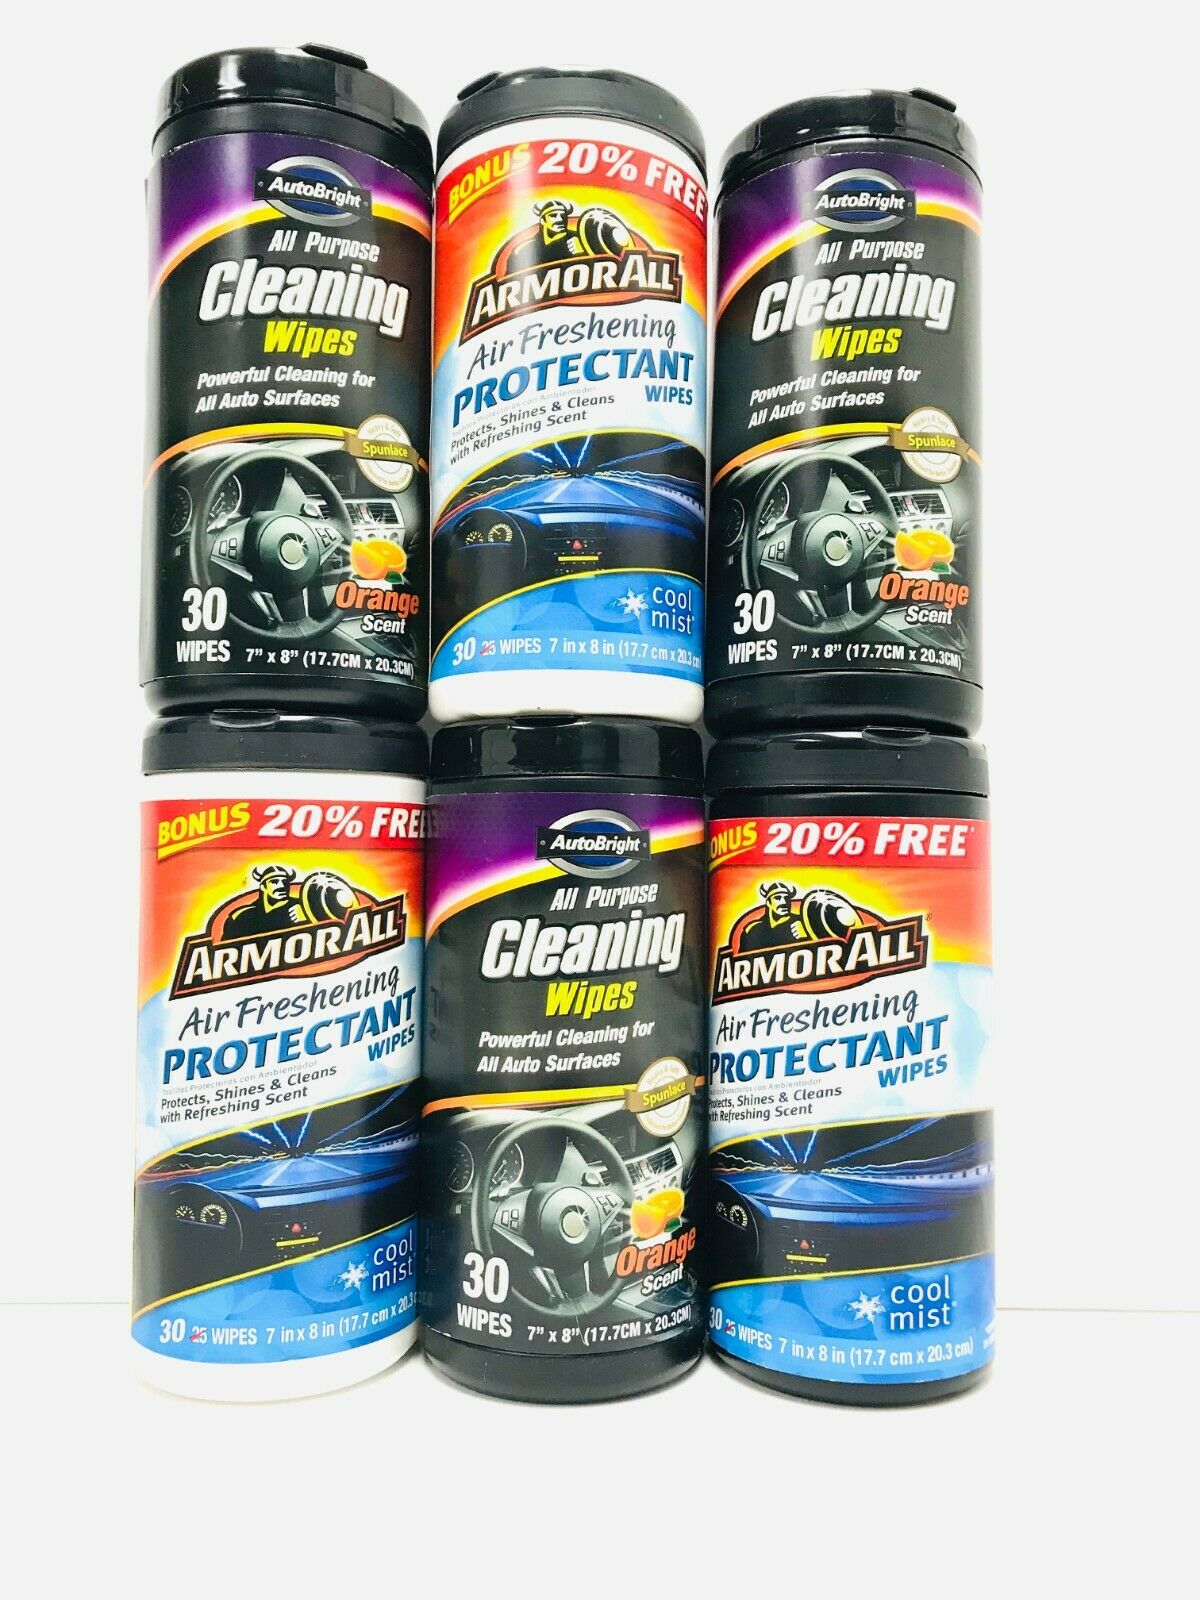 Armor All Auto Bright Cleaning Wipes  Hidden  Diversion Safe Home Stash Can,usa